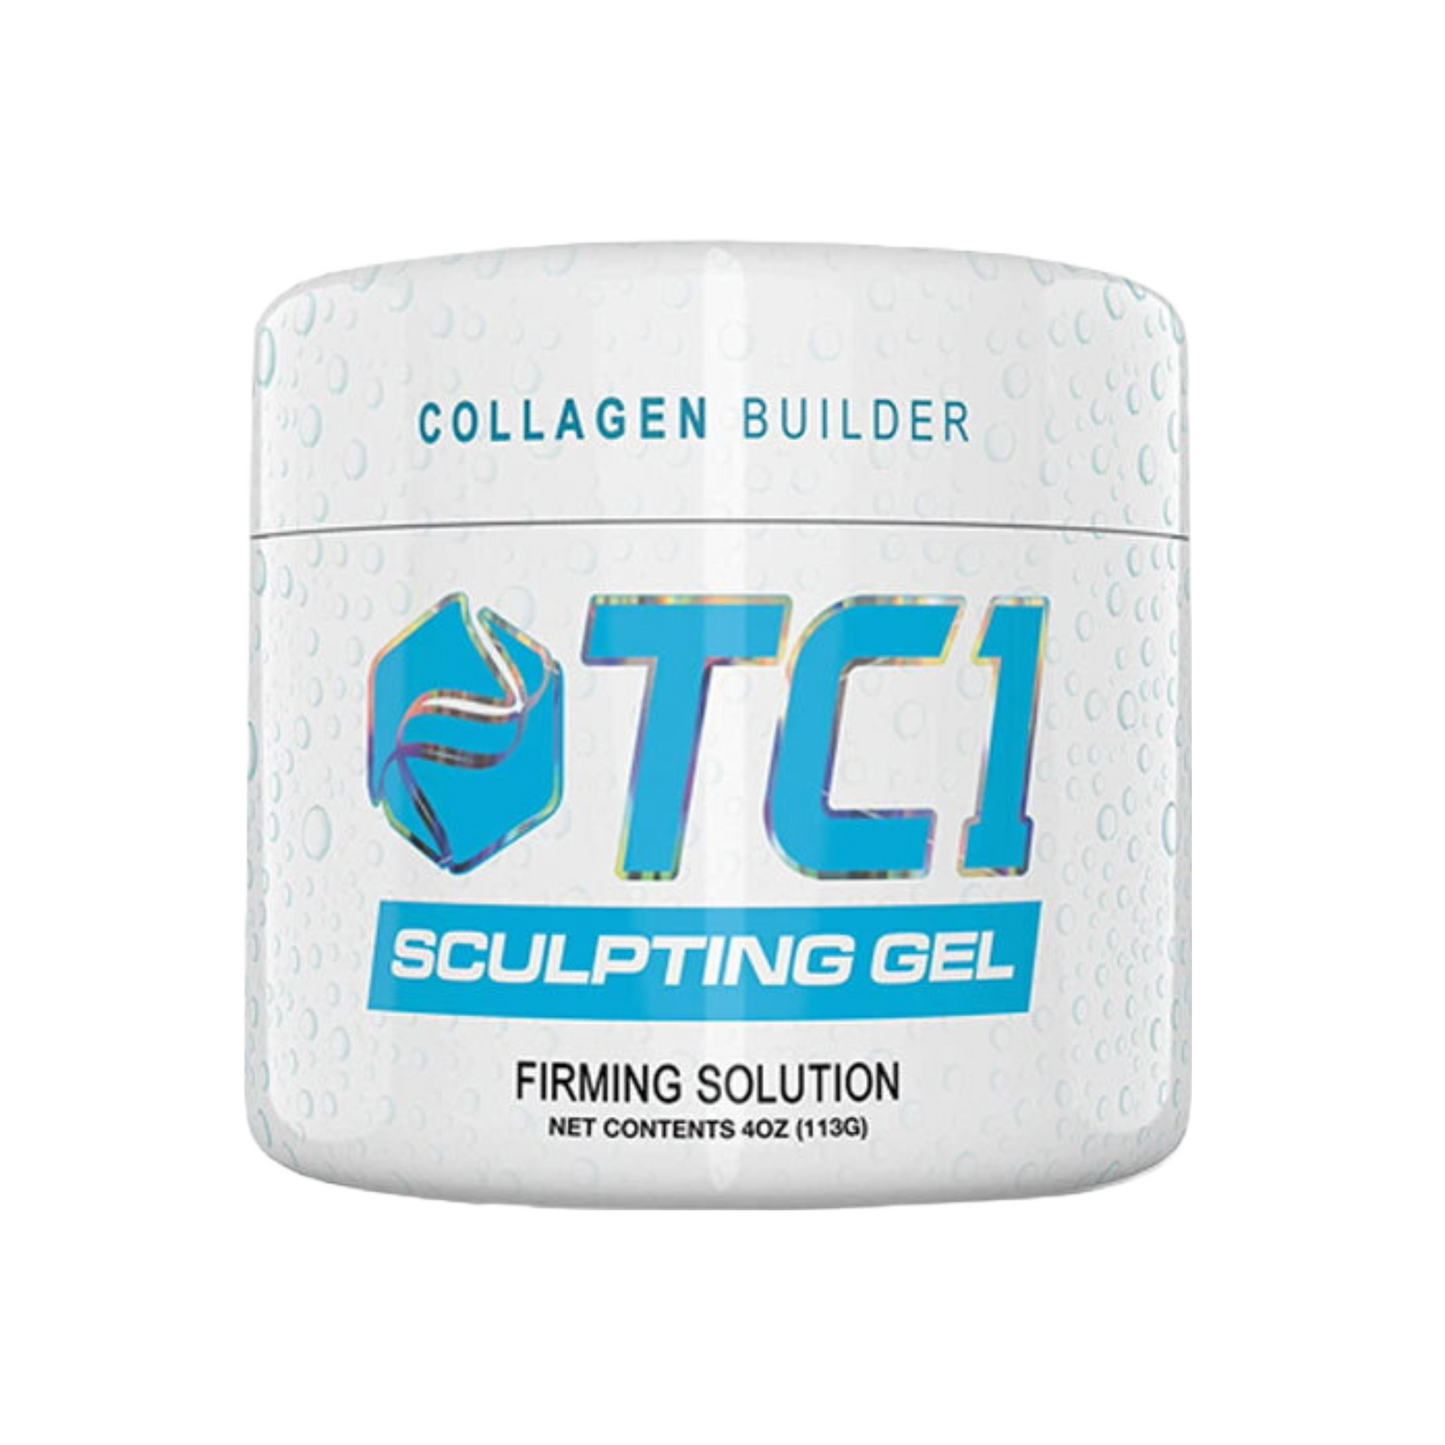 Collagen building Sculpting Gel for Tightening and Firming Skin